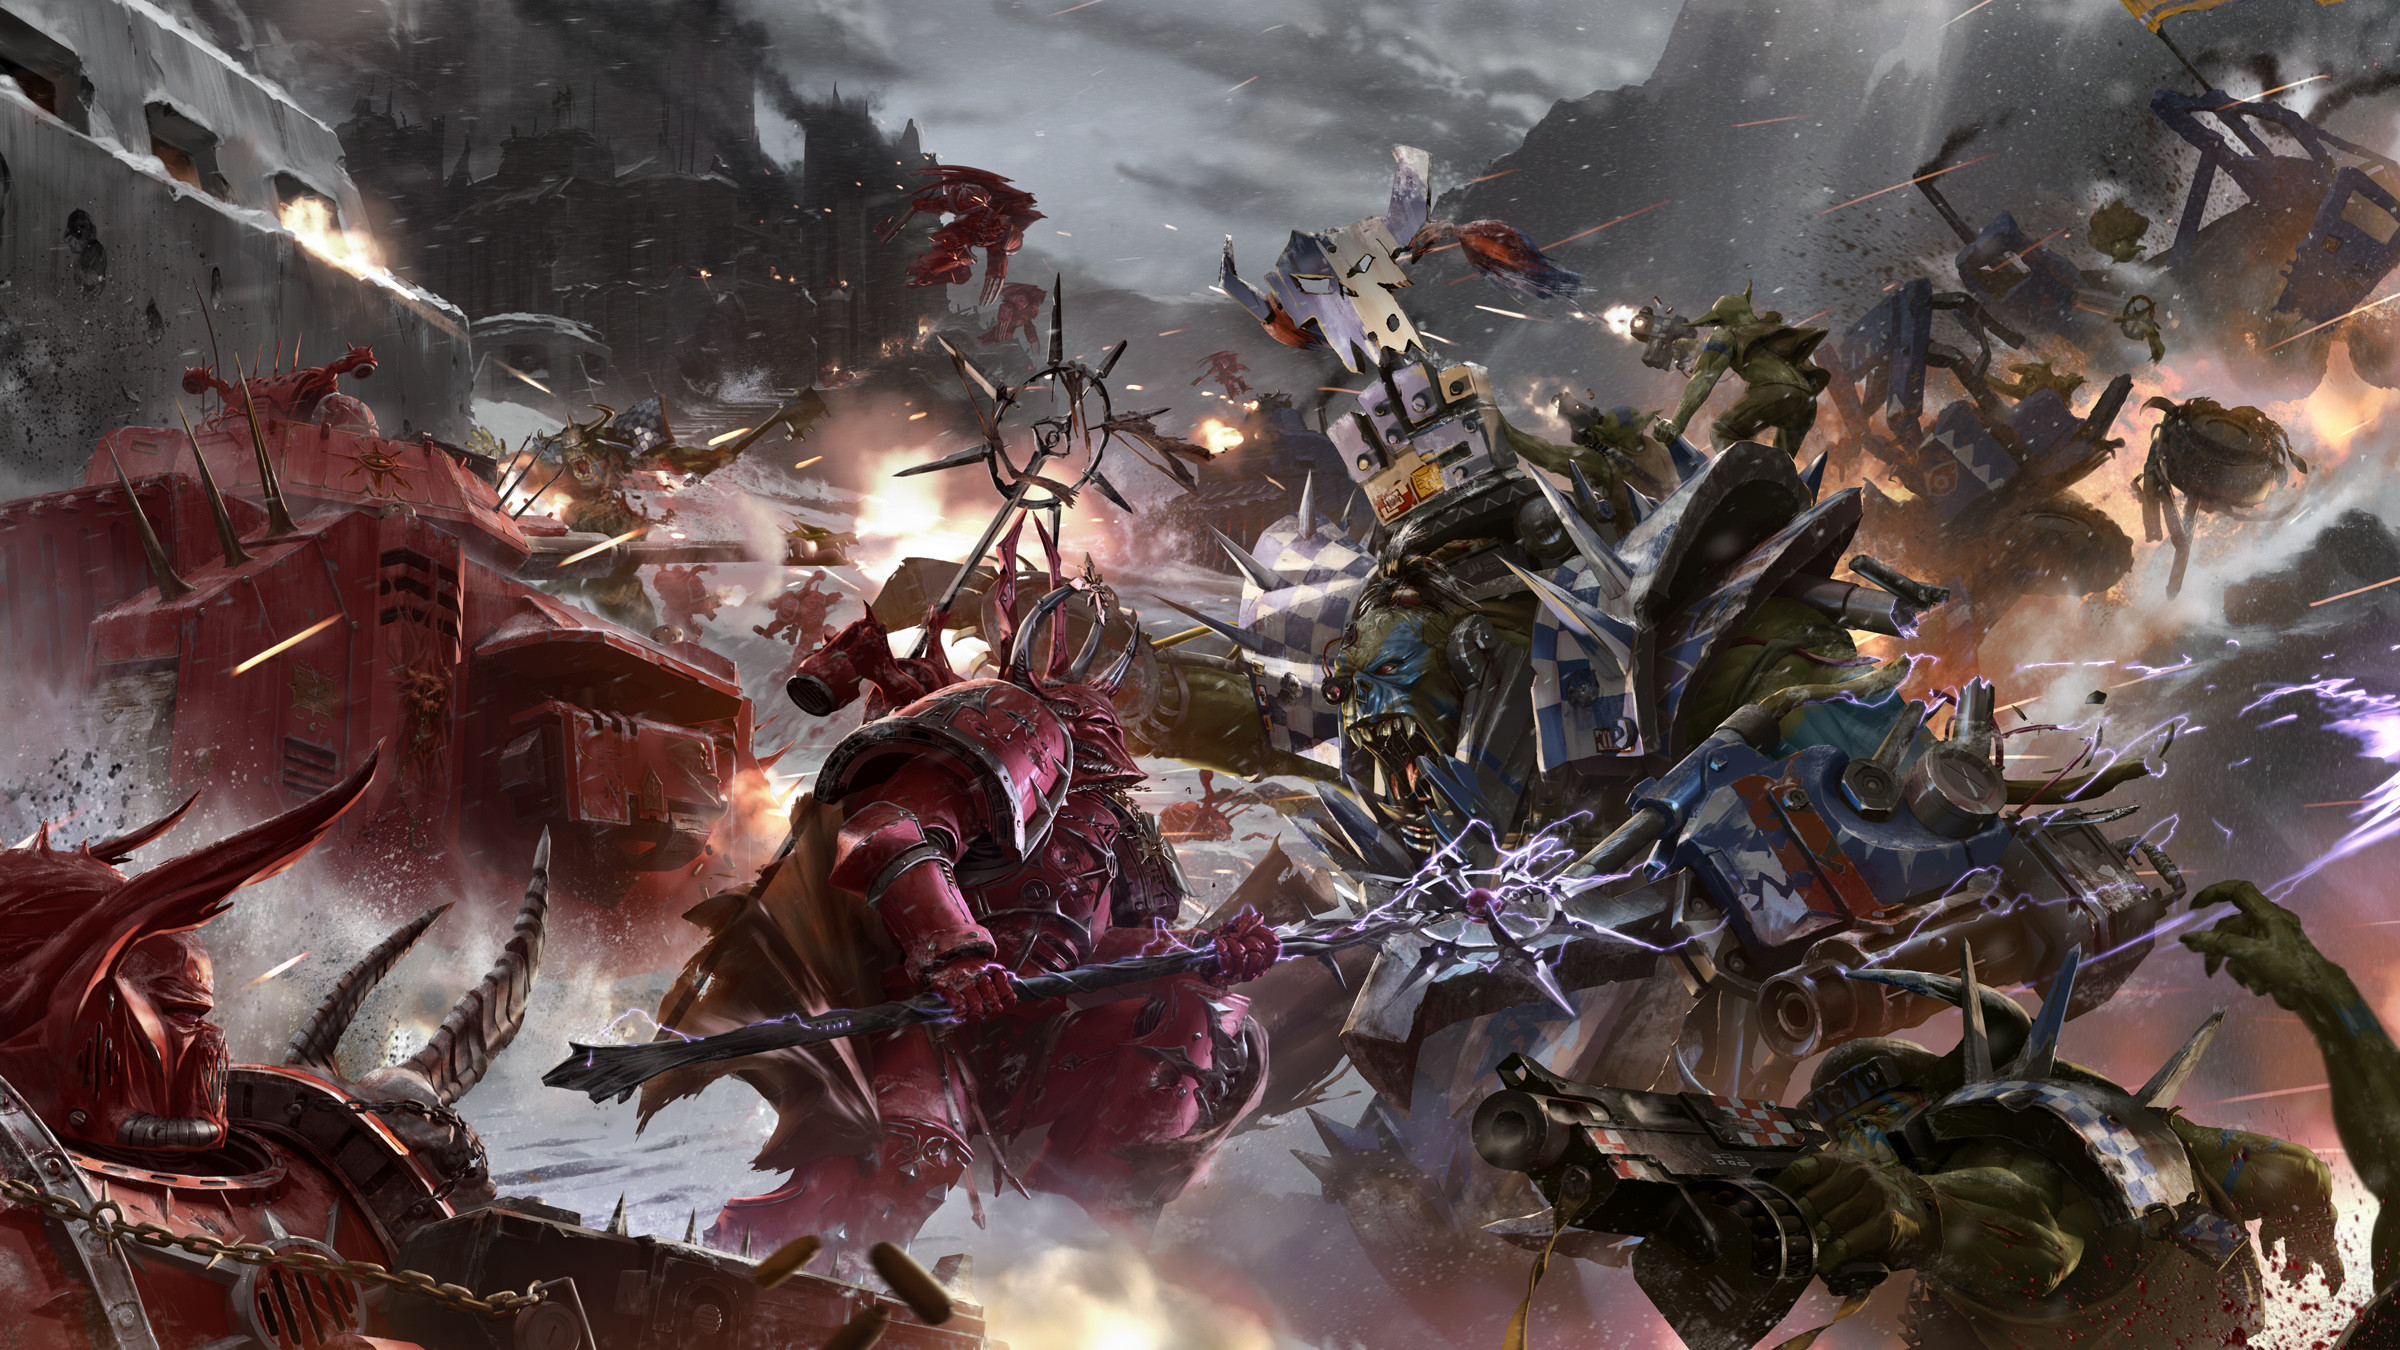 The Battle Of Armageddon Full Hd Wallpaper And Background - Warhammer 40000 - HD Wallpaper 